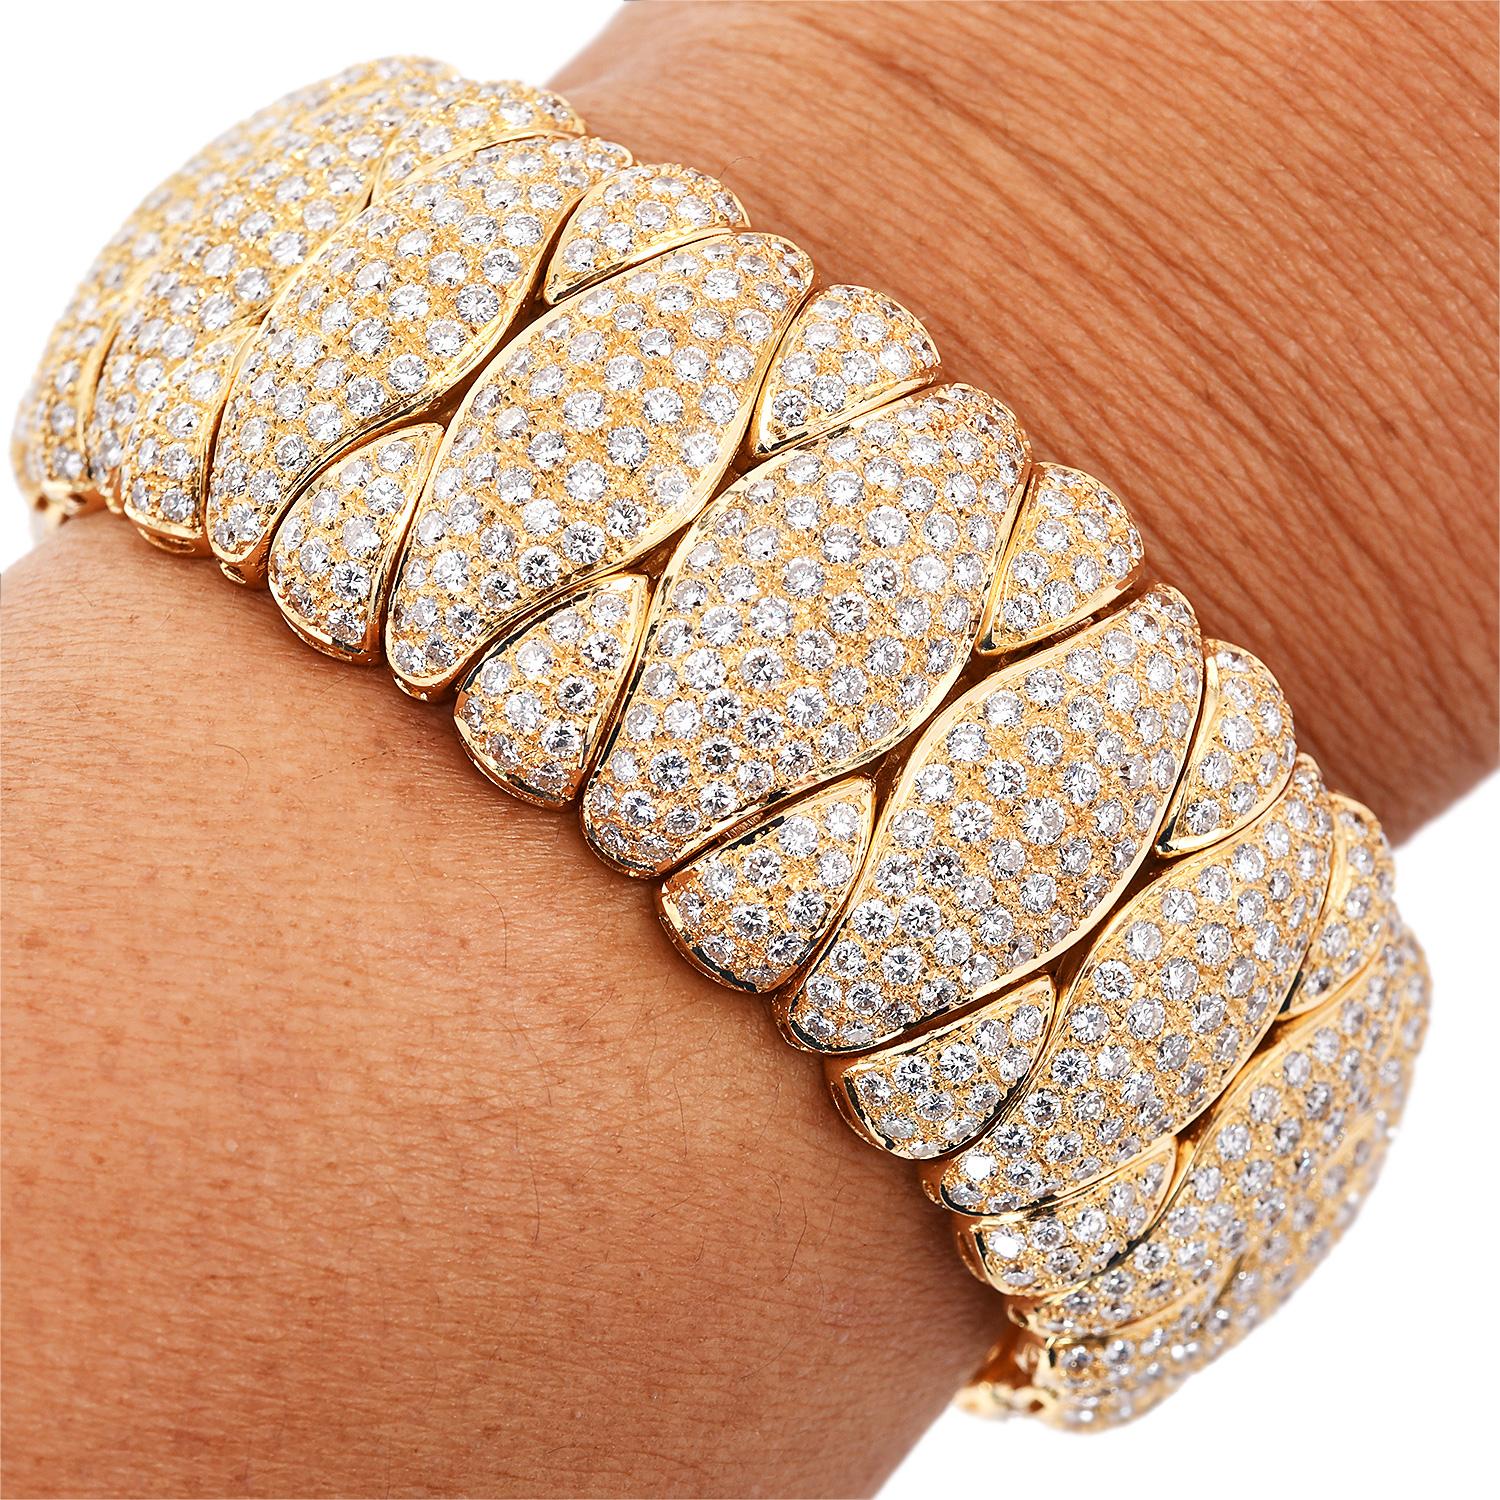 21st Century wide cuff statement bracelet forged in 18K yellow gold with natural round diamonds.

The bracelet is decorated with precious natural round diamonds Pave set in a beautiful design Pattern. 

The bracelet has an open